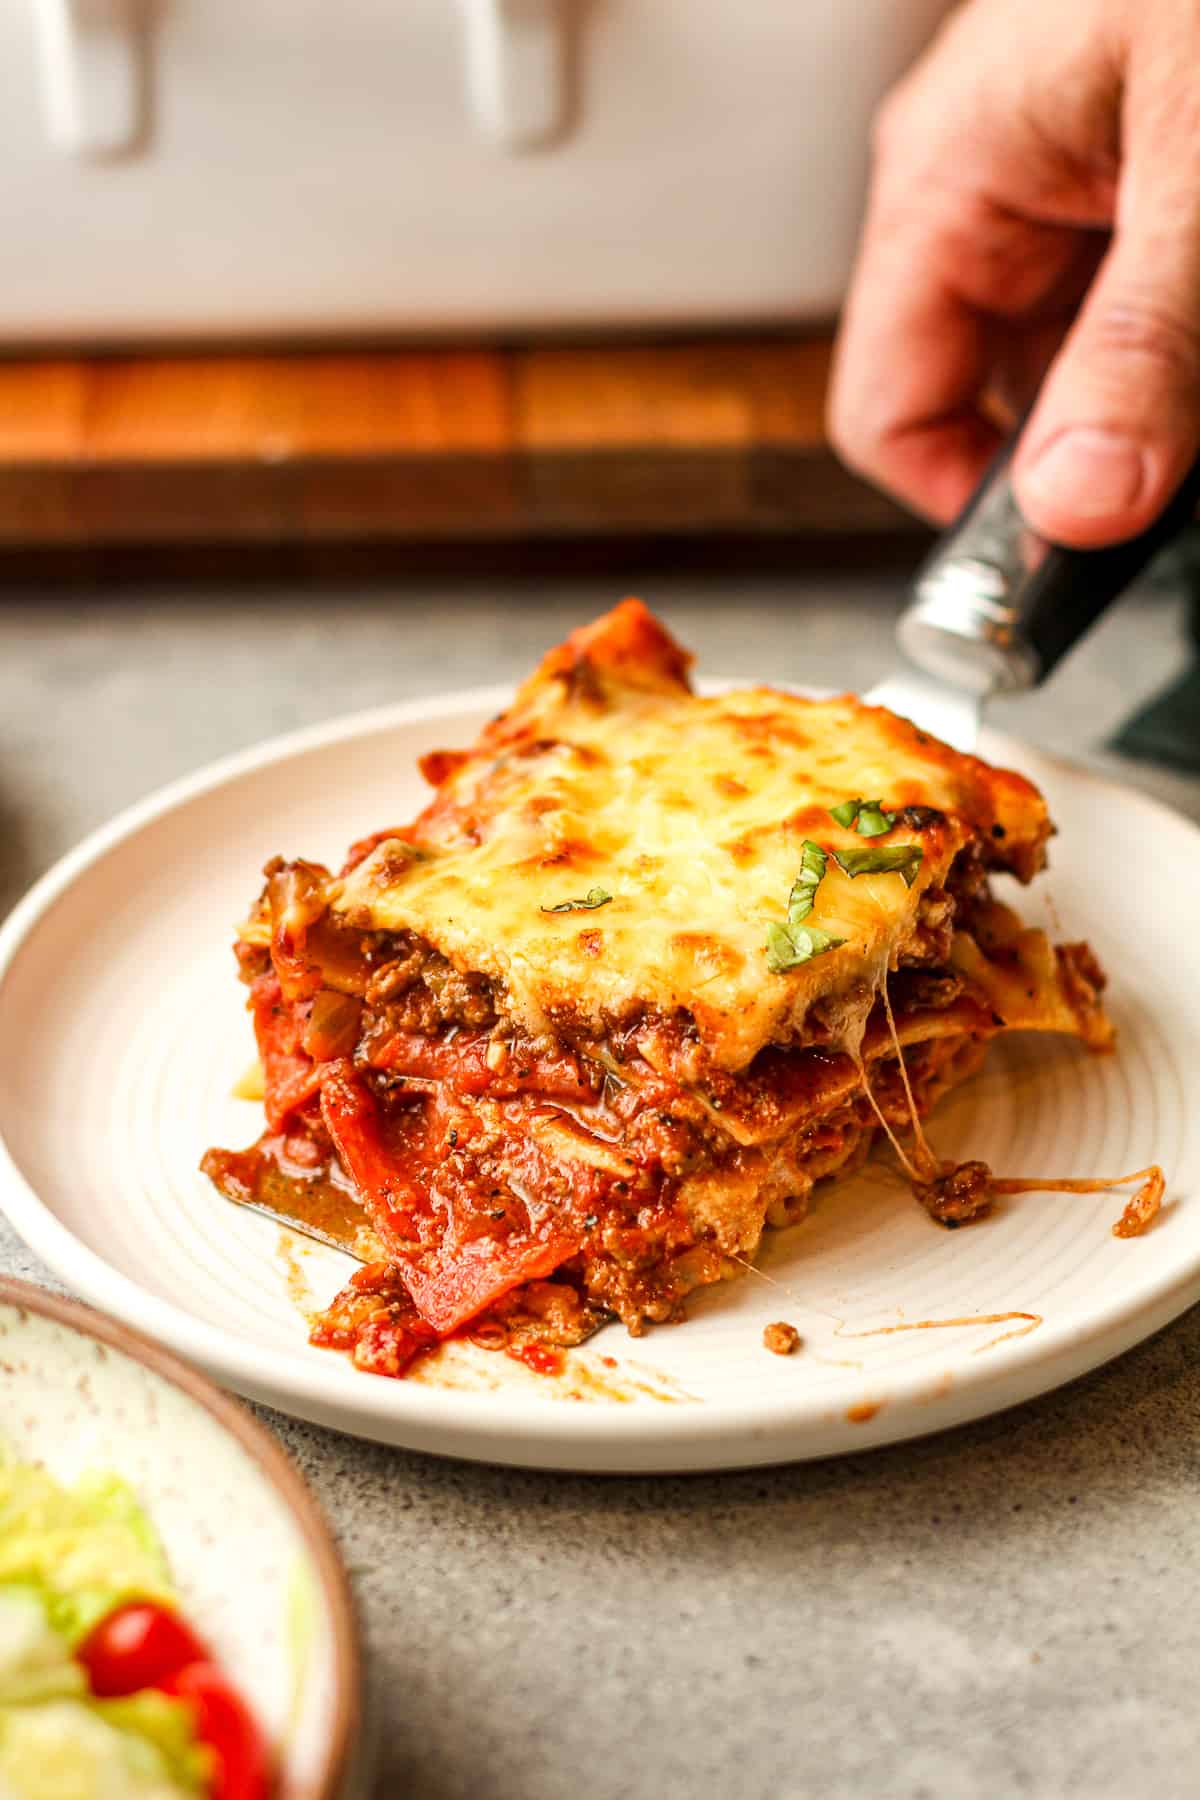 A hand serving up a piece of lasagna on a plate.